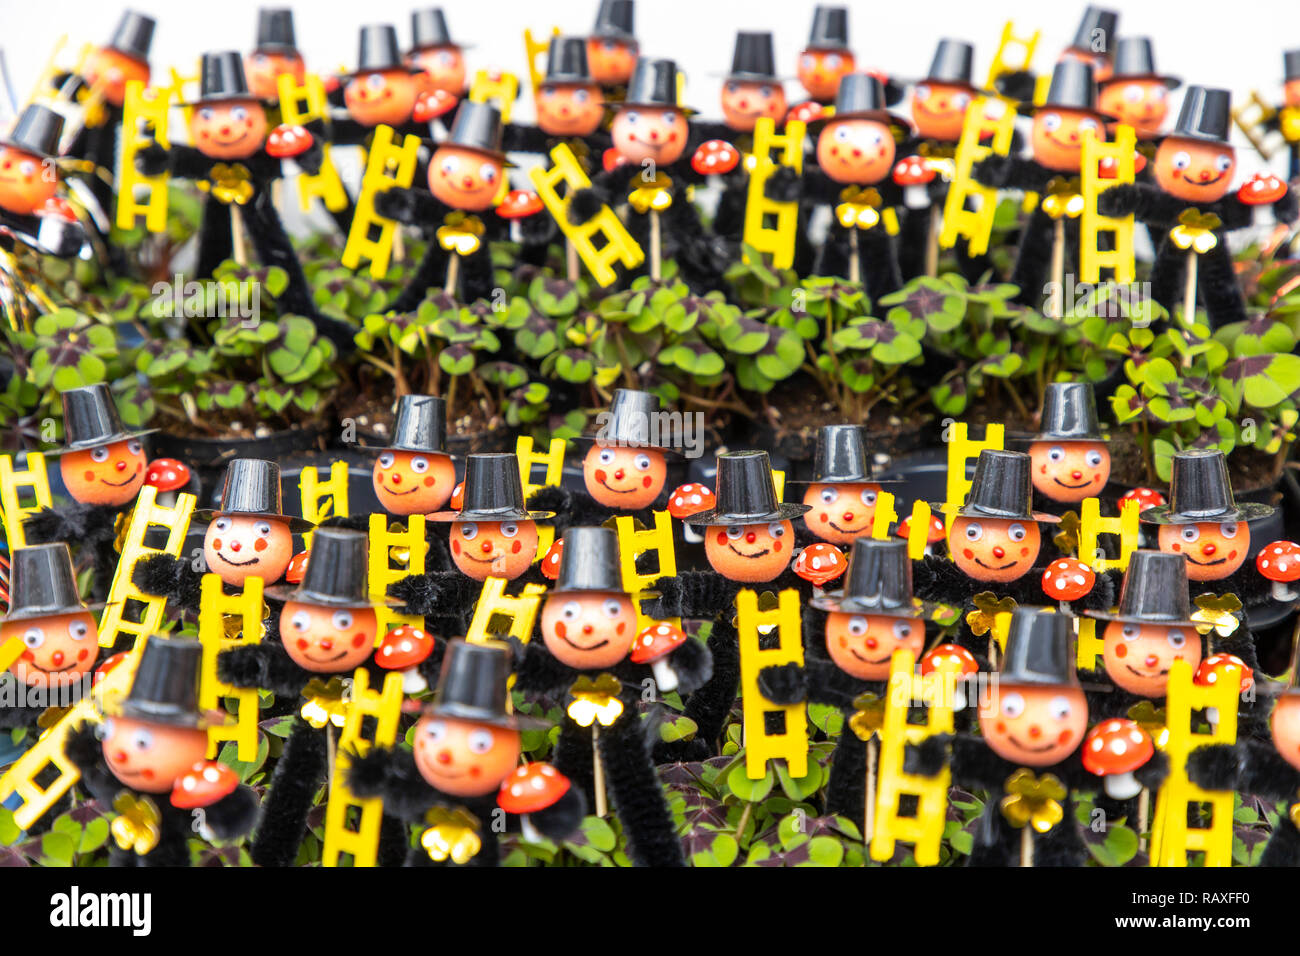 Neujahrchen, good luck charm at the beginning of the year, chimney sweep figures with lucky clover plant, Stock Photo